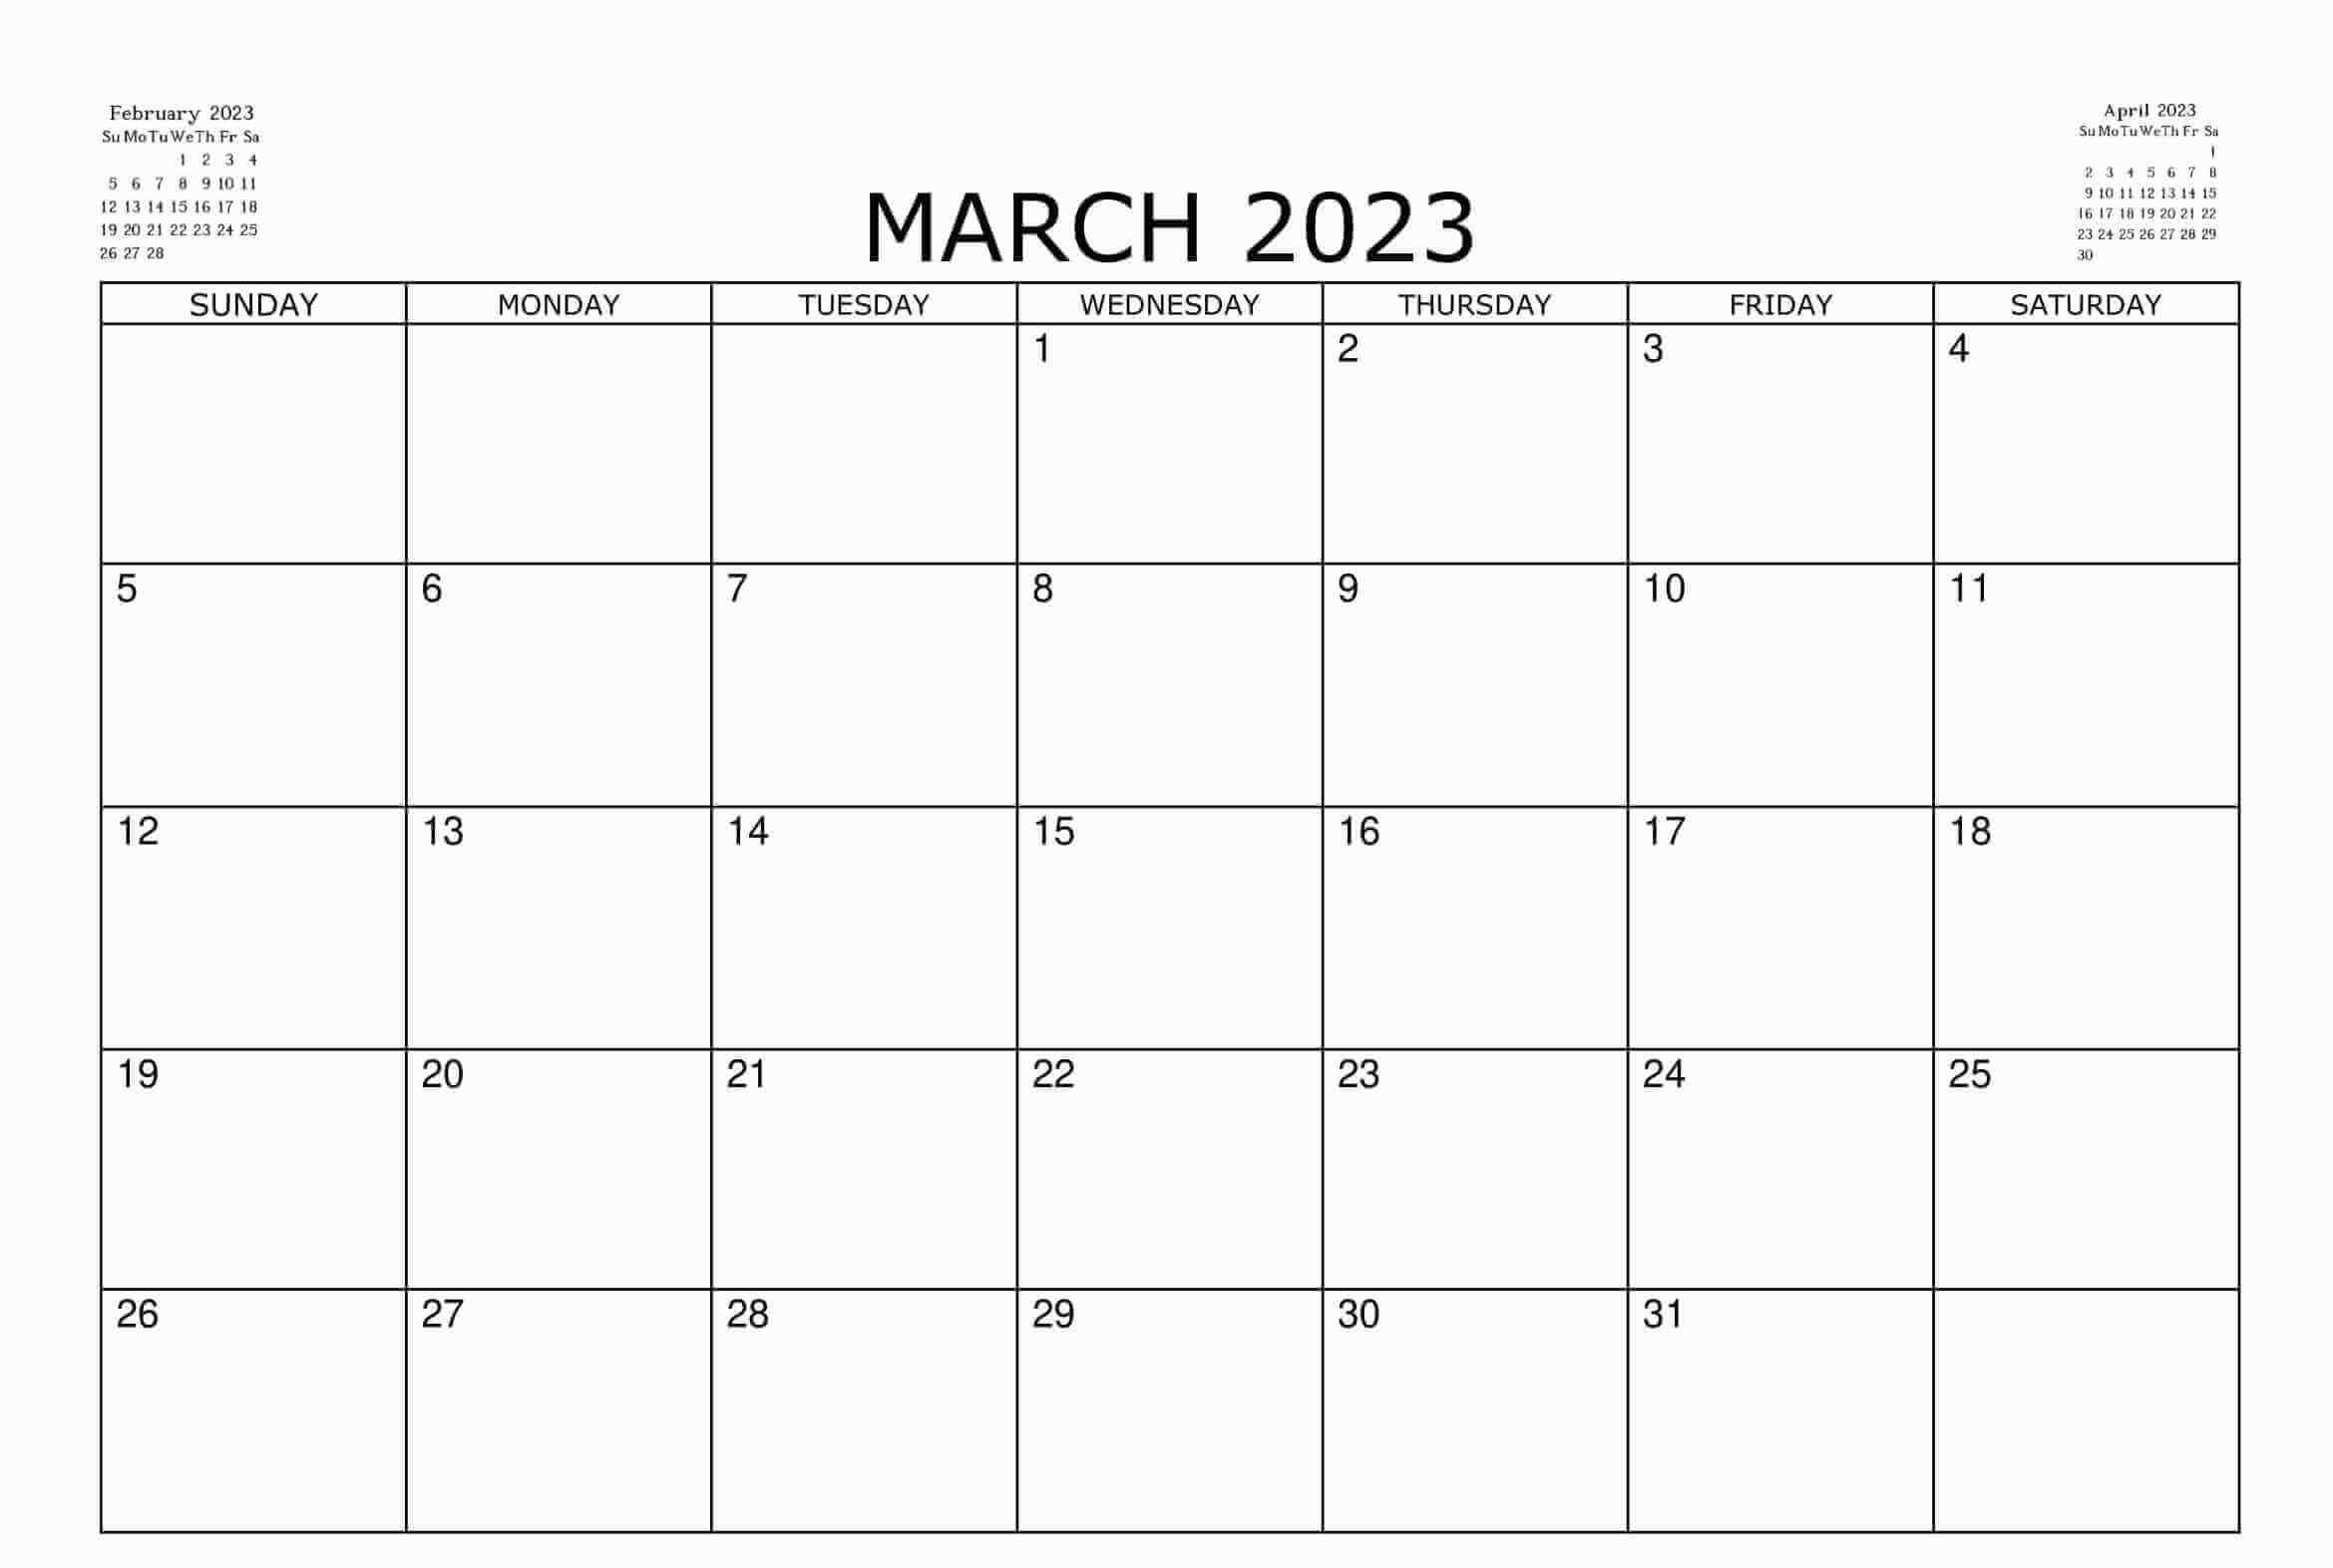 March 2023 Calendar with Feb Apr Overview